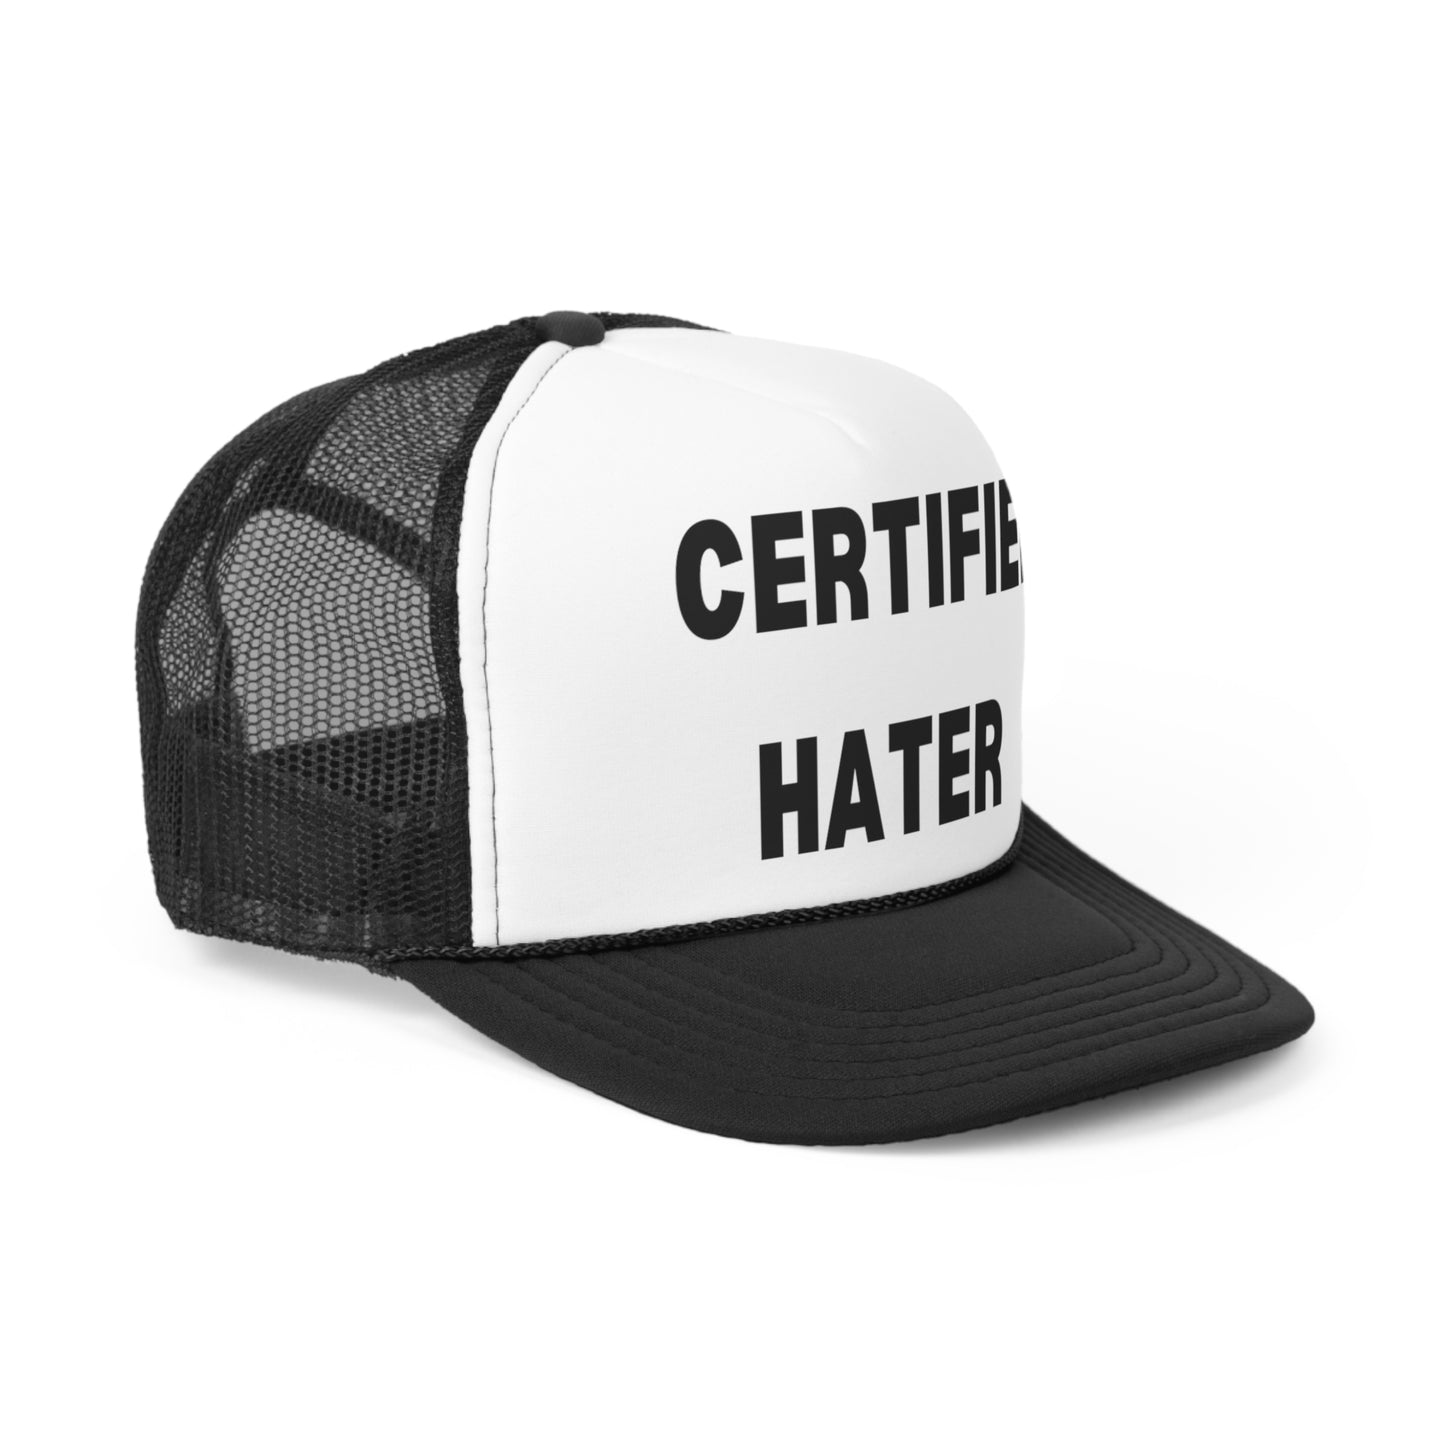 Certified Hater - Hat